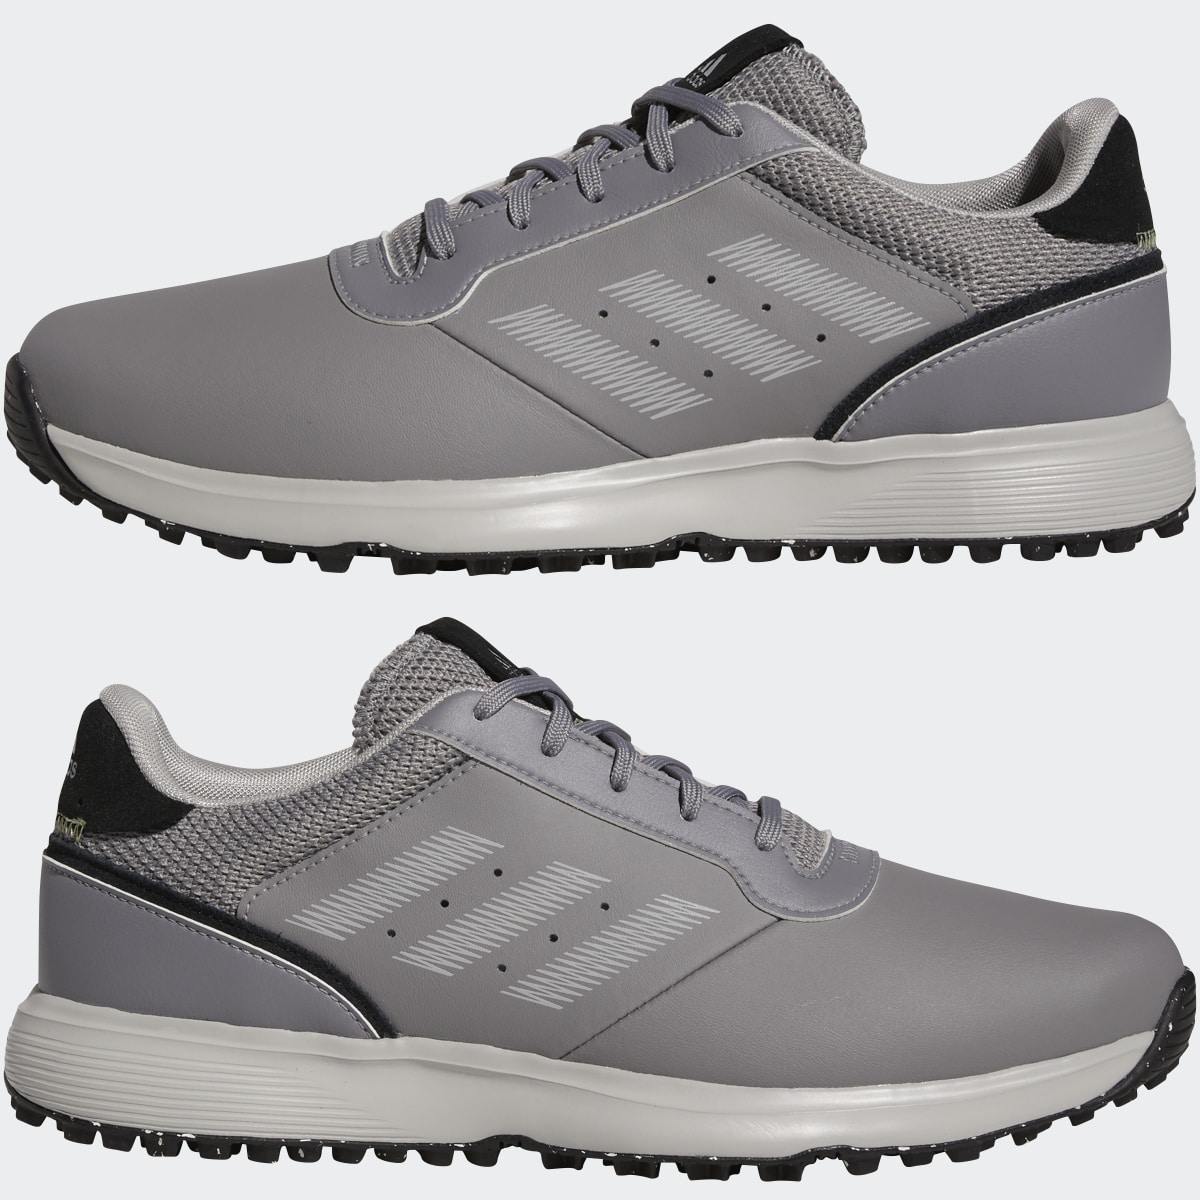 Adidas S2G Spikeless Leather Golf Shoes. 8